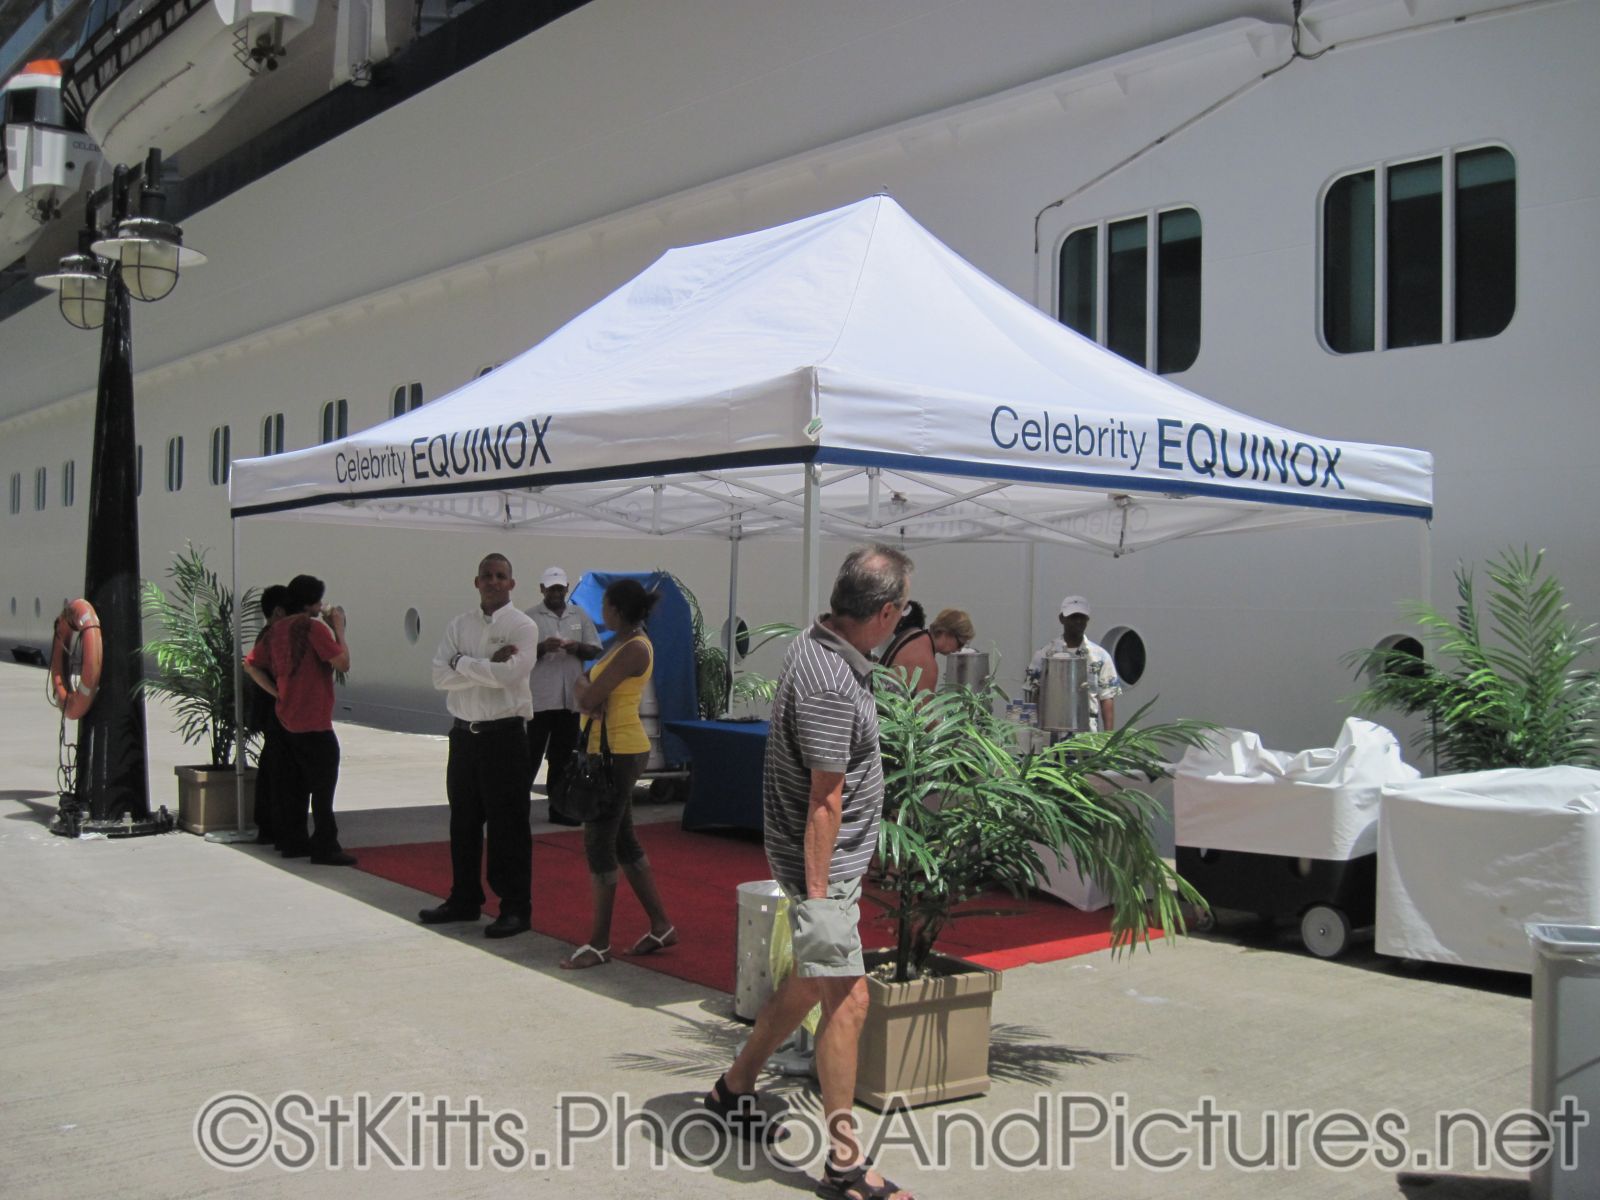 Celebrity Equinox guest comfort tent at St Kitts.jpg
